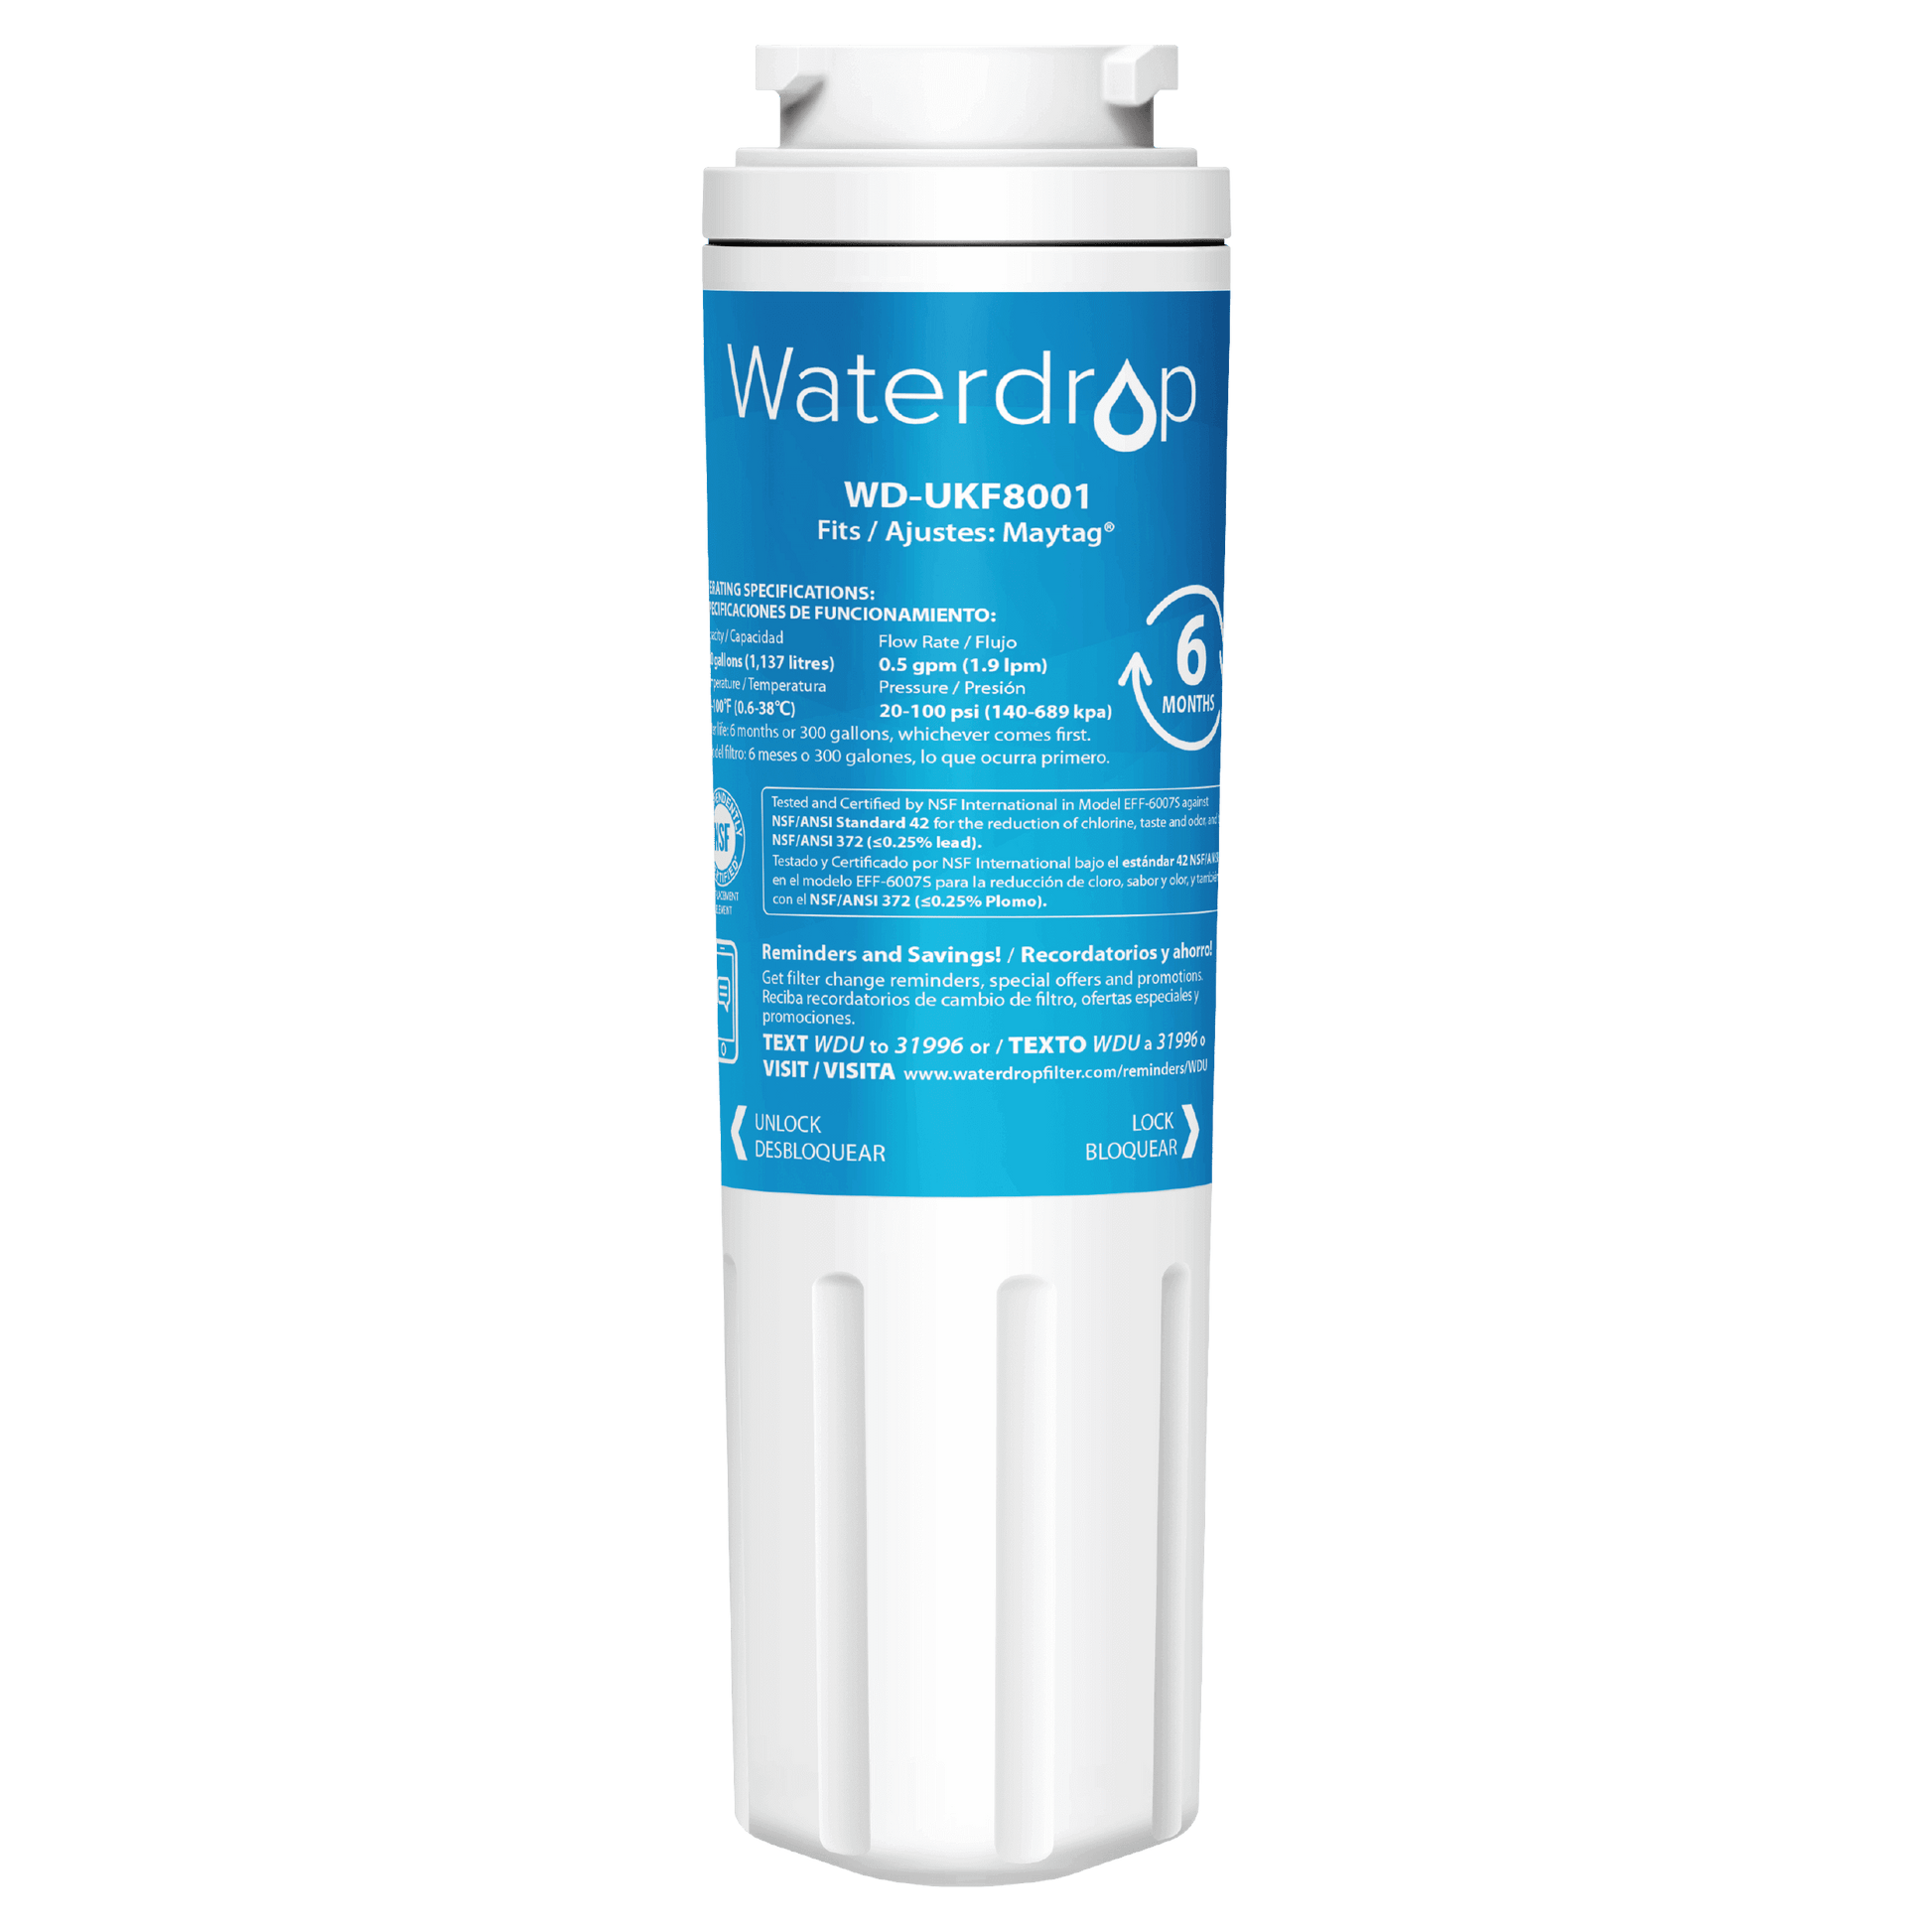 Waterdrop Replacement for Everydrop Filter 4, UKF8001(4packs)